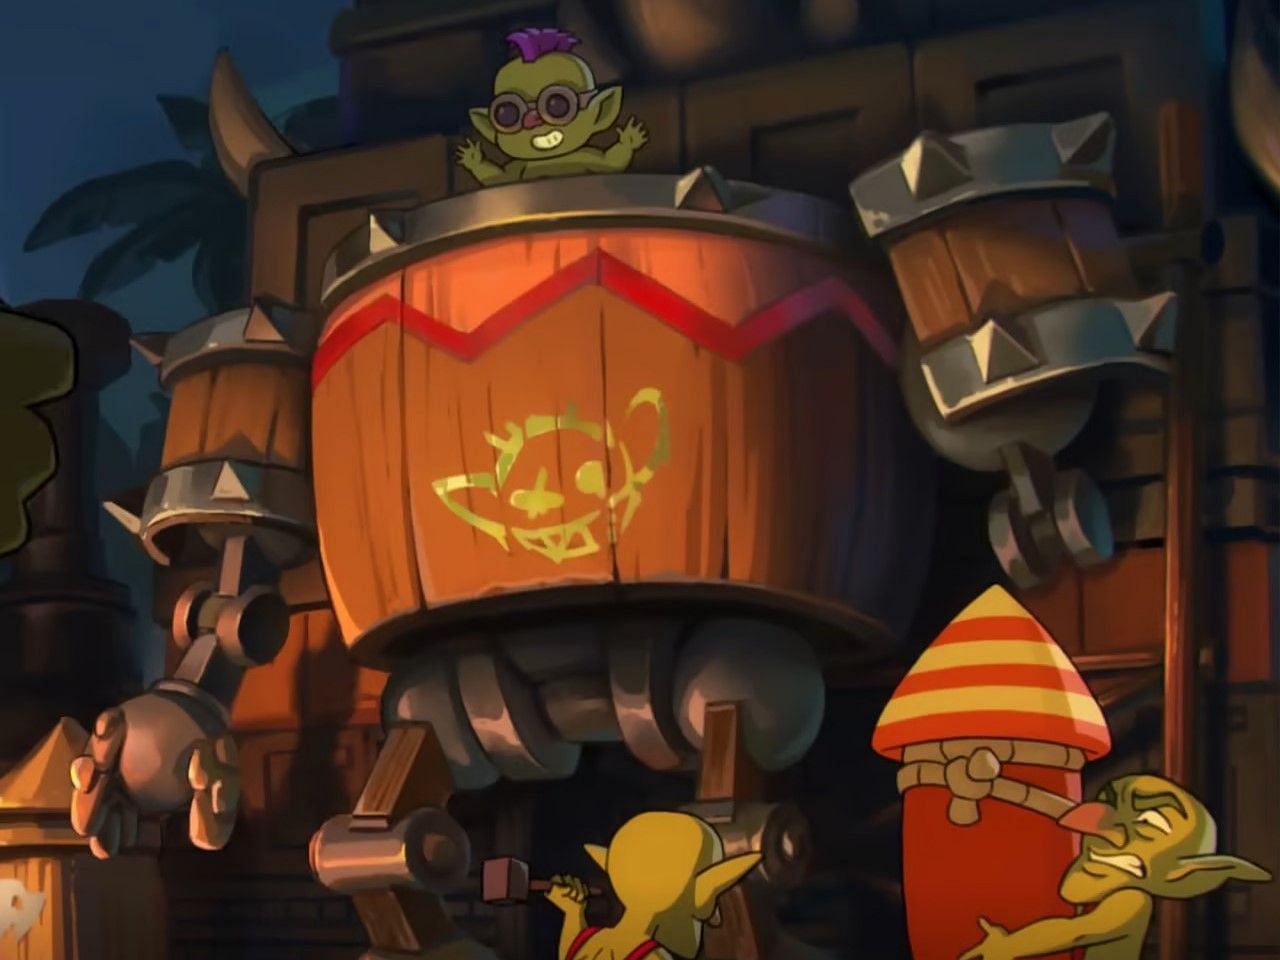 Goblins attaching rockets to the suit (Image via Supercell || RoyaleAPI)